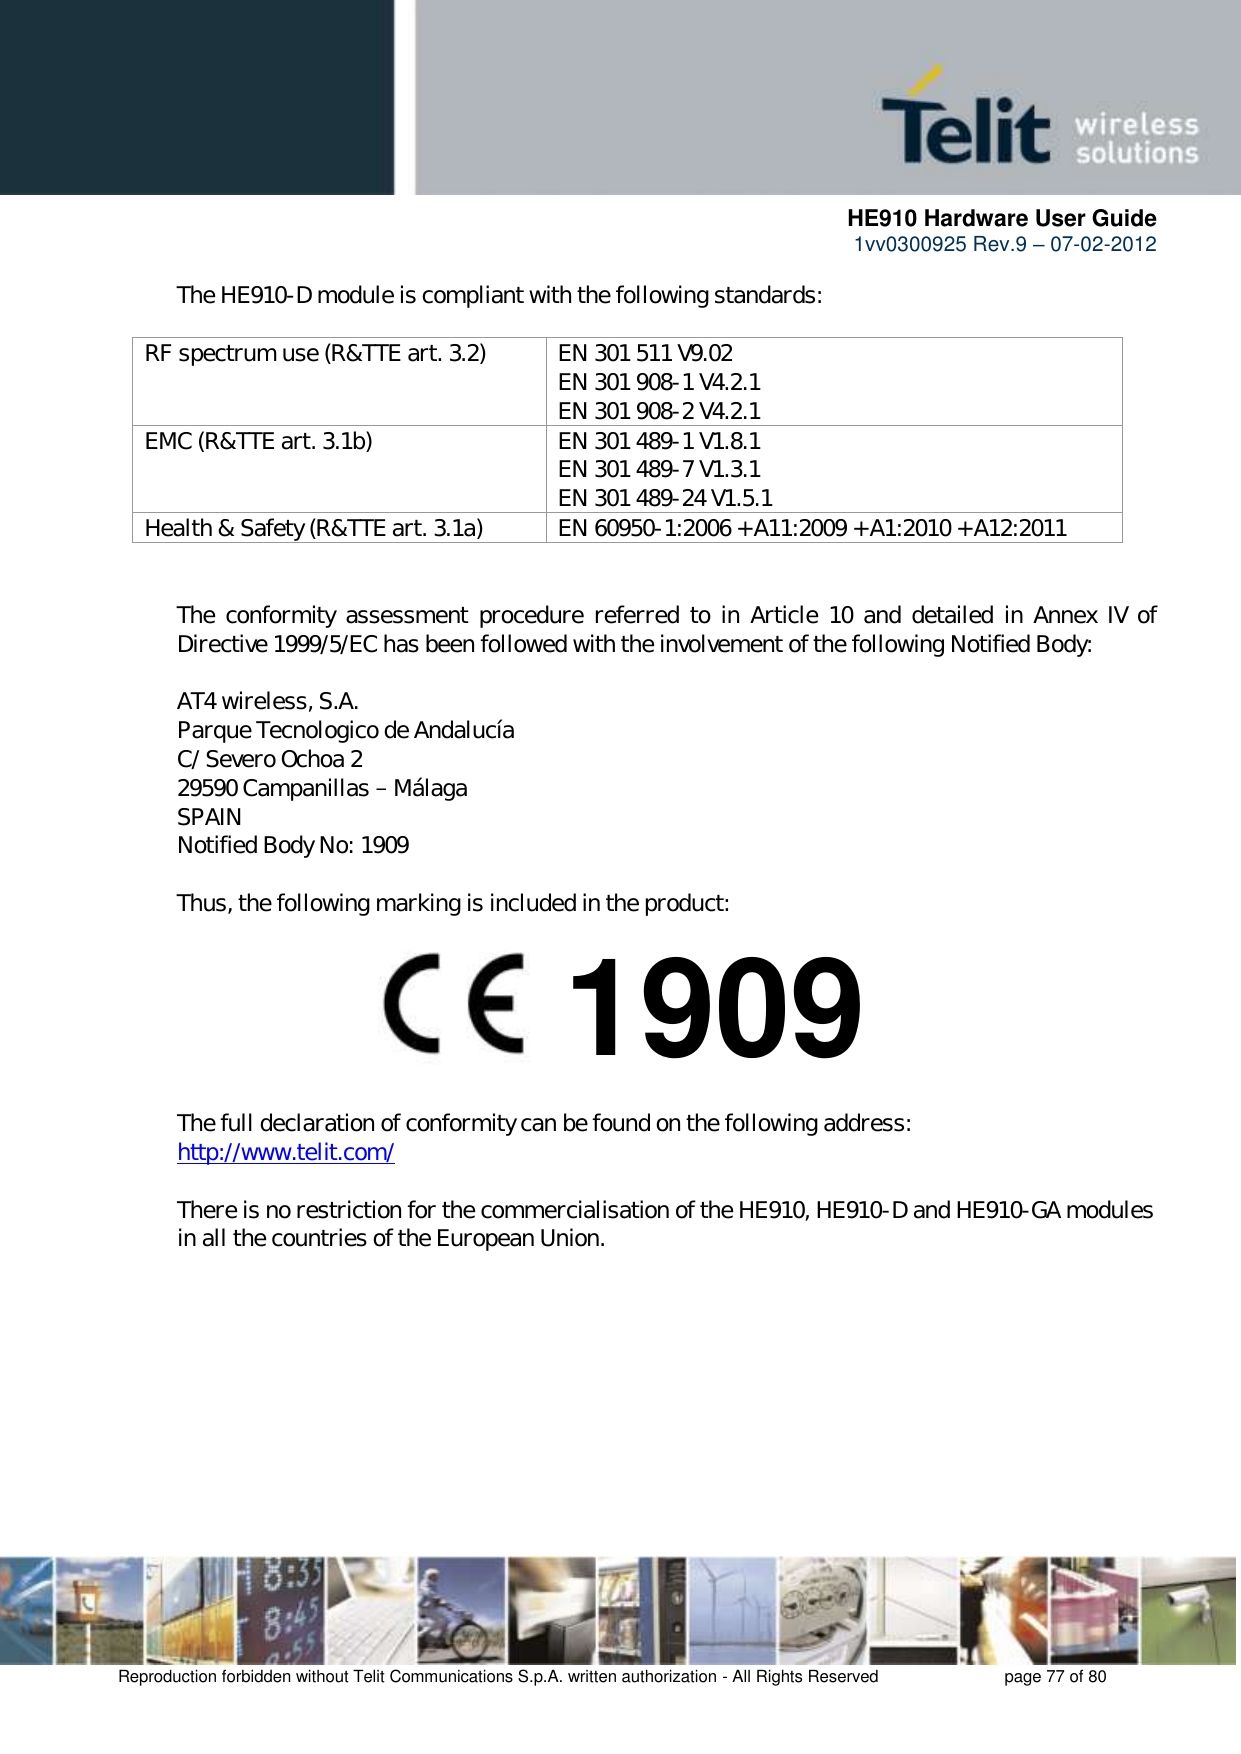      HE910 Hardware User Guide 1vv0300925 Rev.9 – 07-02-2012    Reproduction forbidden without Telit Communications S.p.A. written authorization - All Rights Reserved    page 77 of 80  The HE910-D module is compliant with the following standards:  RF spectrum use (R&amp;TTE art. 3.2) EN 301 511 V9.02 EN 301 908-1 V4.2.1 EN 301 908-2 V4.2.1 EMC (R&amp;TTE art. 3.1b) EN 301 489-1 V1.8.1 EN 301 489-7 V1.3.1 EN 301 489-24 V1.5.1 Health &amp; Safety (R&amp;TTE art. 3.1a) EN 60950-1:2006 + A11:2009 + A1:2010 + A12:2011   The  conformity assessment procedure  referred  to  in Article  10  and  detailed in  Annex  IV  of Directive 1999/5/EC has been followed with the involvement of the following Notified Body:  AT4 wireless, S.A. Parque Tecnologico de Andalucía C/ Severo Ochoa 2 29590 Campanillas   Málaga SPAIN Notified Body No: 1909  Thus, the following marking is included in the product:        The full declaration of conformity can be found on the following address: http://www.telit.com/  There is no restriction for the commercialisation of the HE910, HE910-D and HE910-GA modules in all the countries of the European Union.   1909 